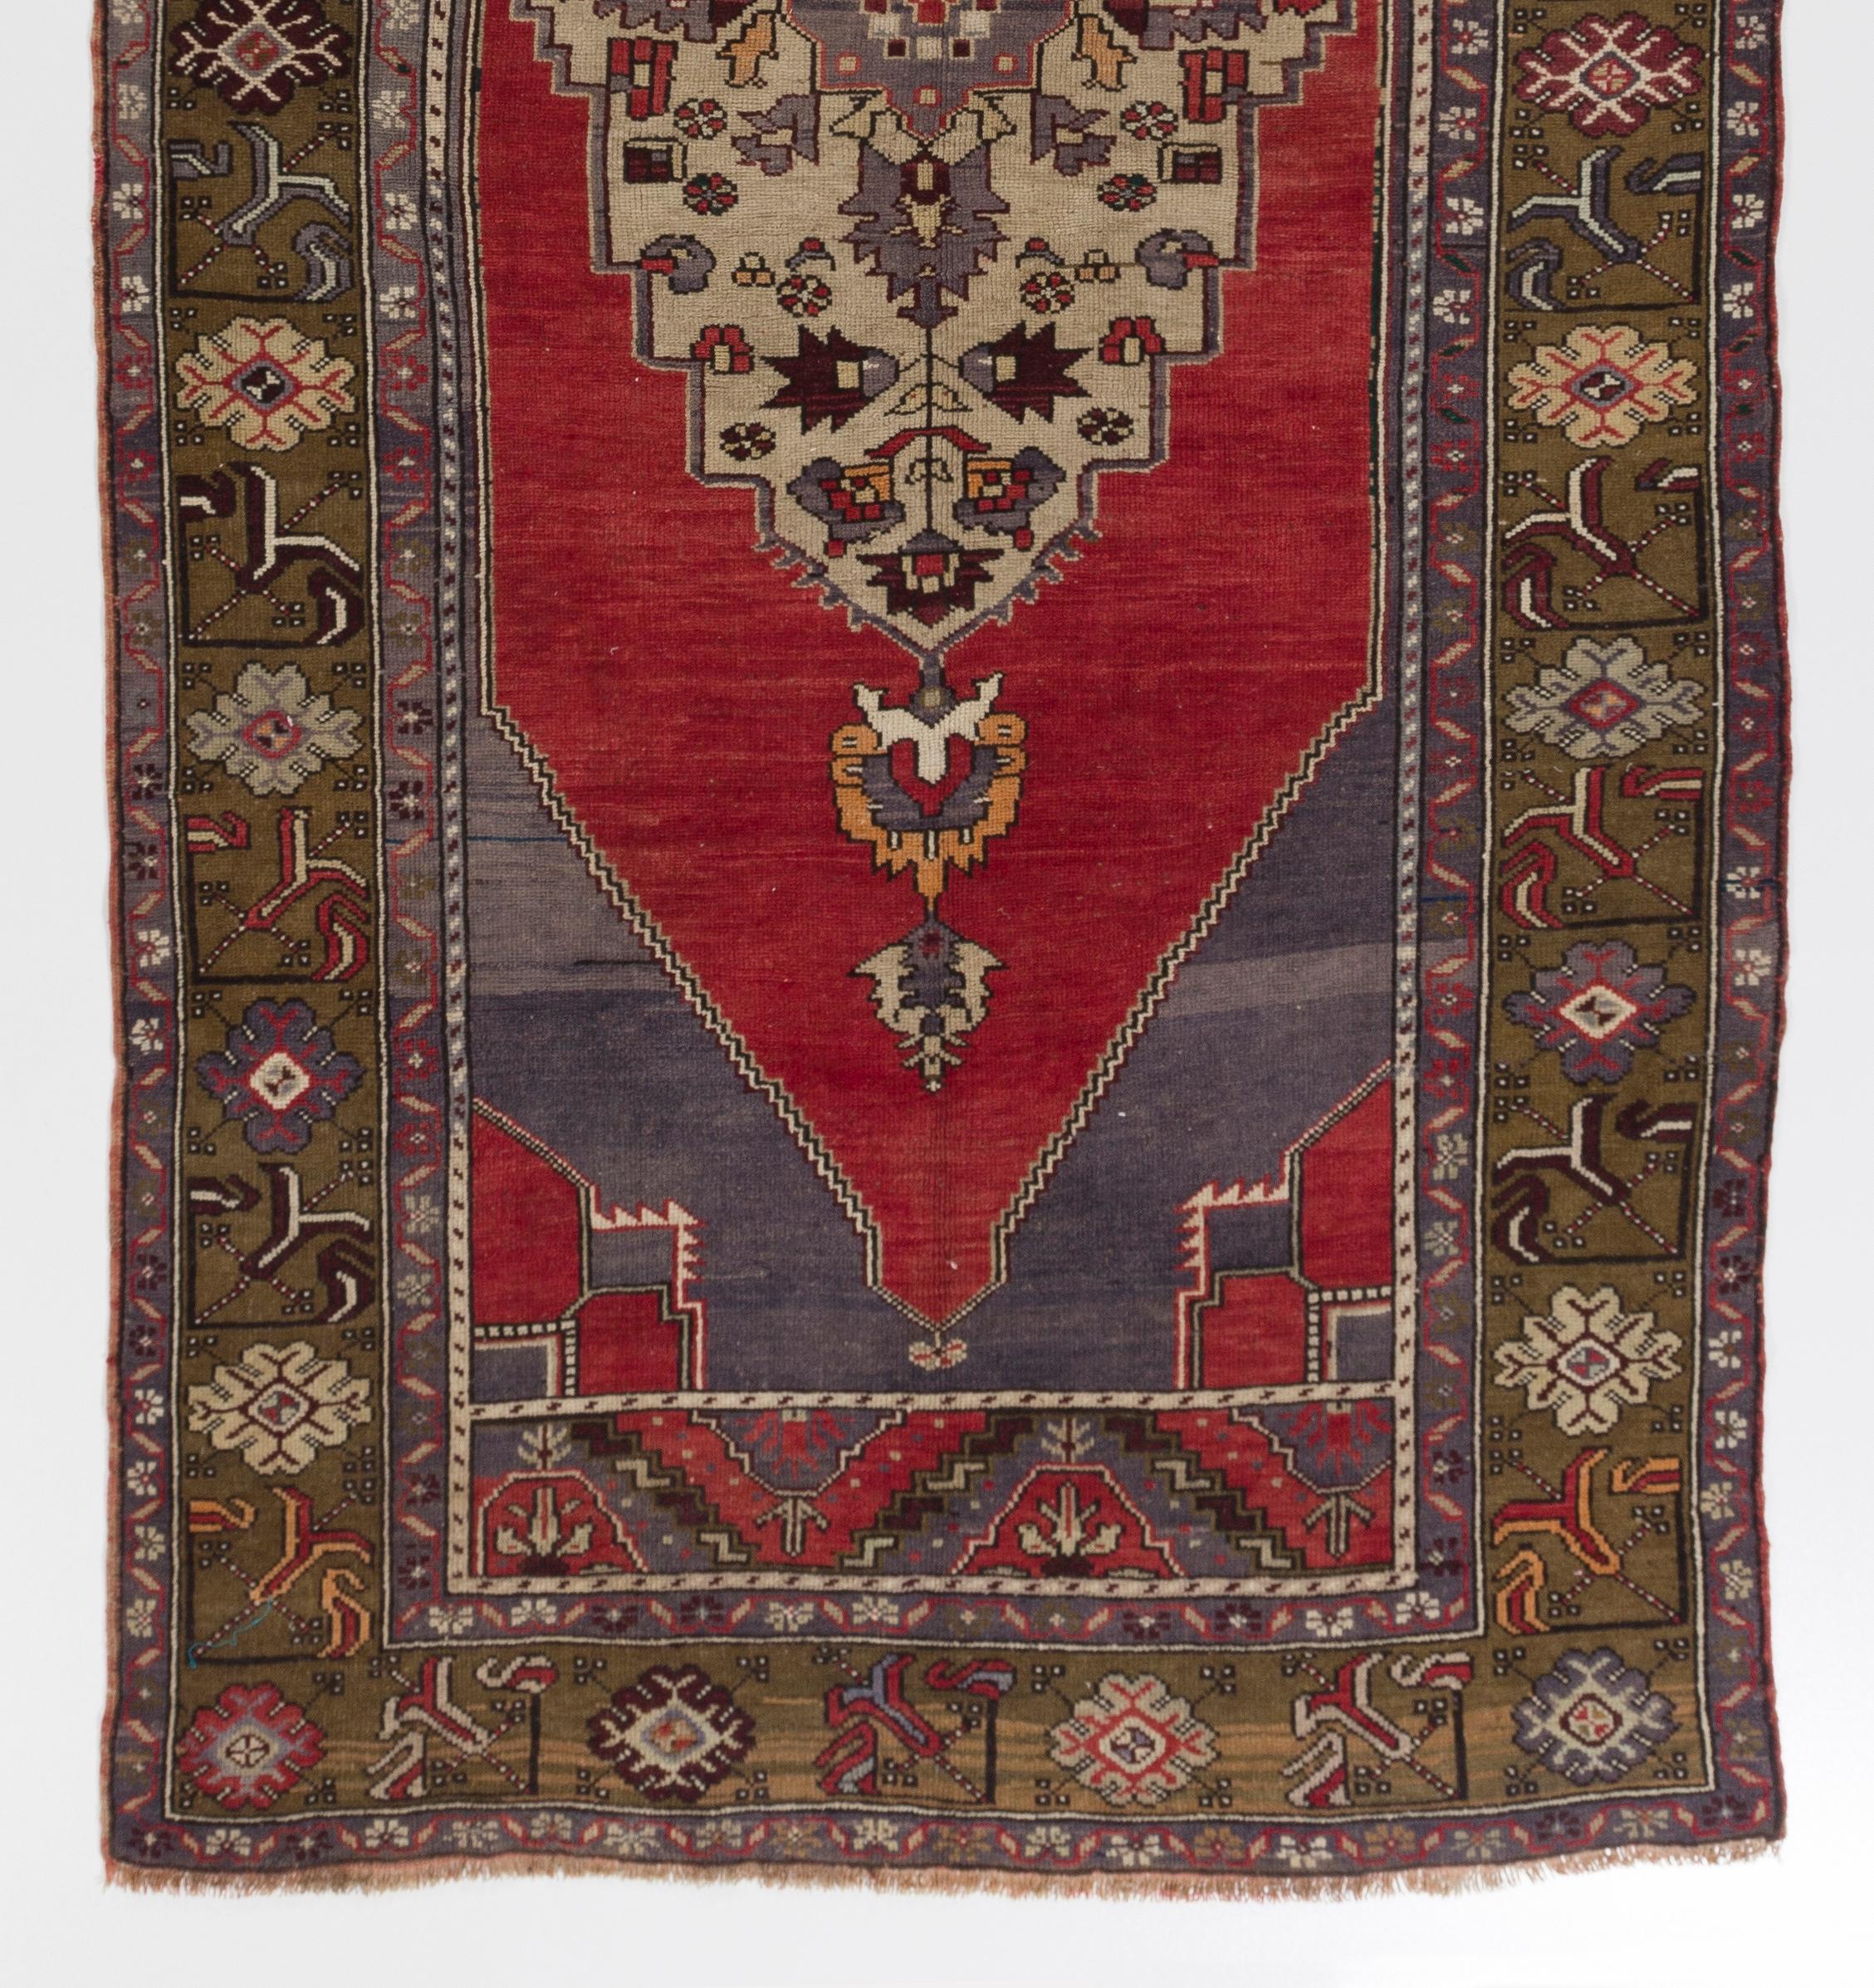 This vintage hand knotted Turkish runner rug features a large, elongated medallion in beige filled with geometric floral motifs at the centre of its plain red field. The corner pieces are in cerulean blue and feature striated color technique. The